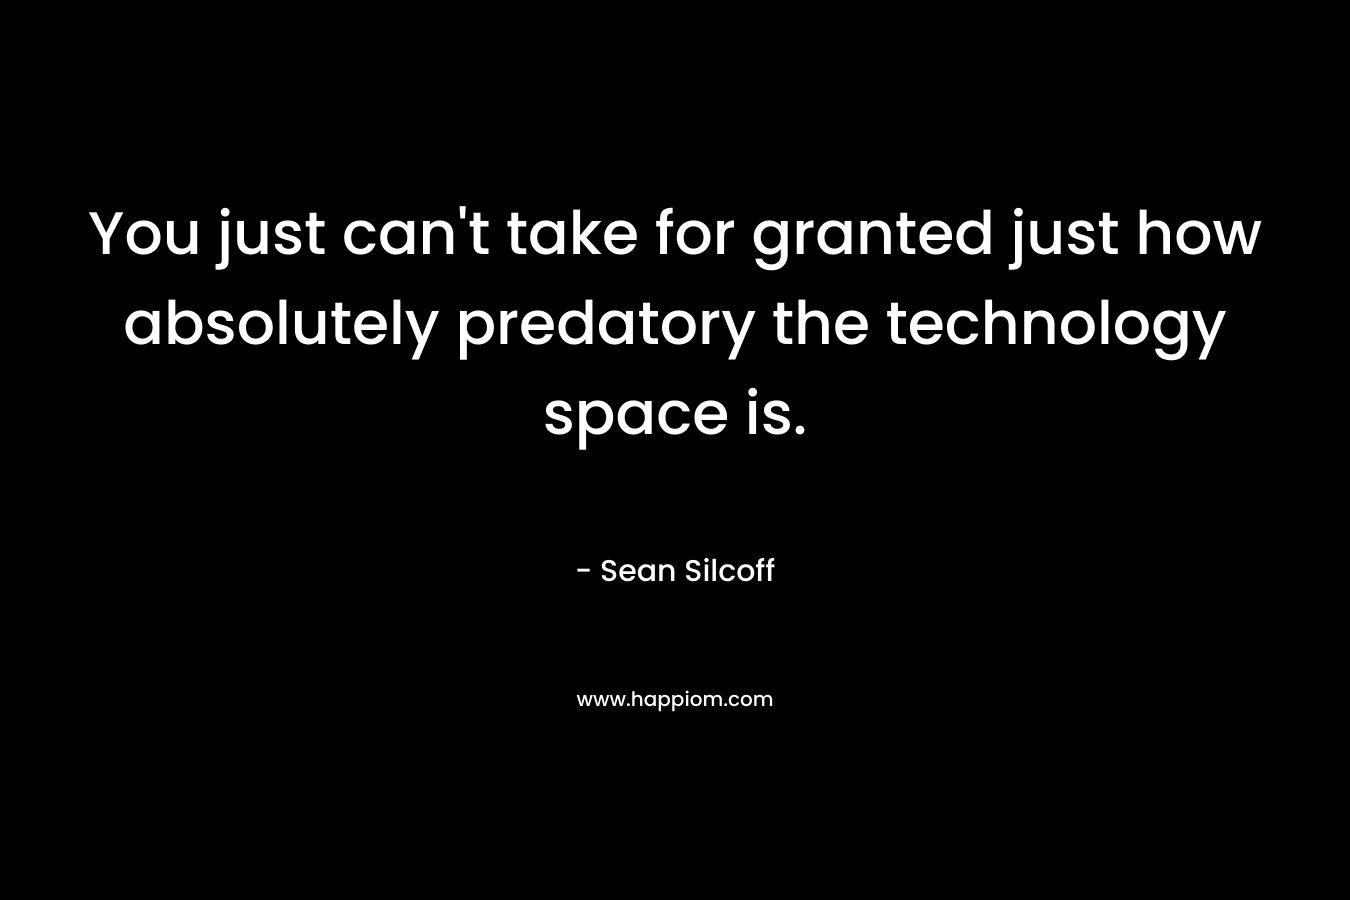 You just can’t take for granted just how absolutely predatory the technology space is. – Sean Silcoff